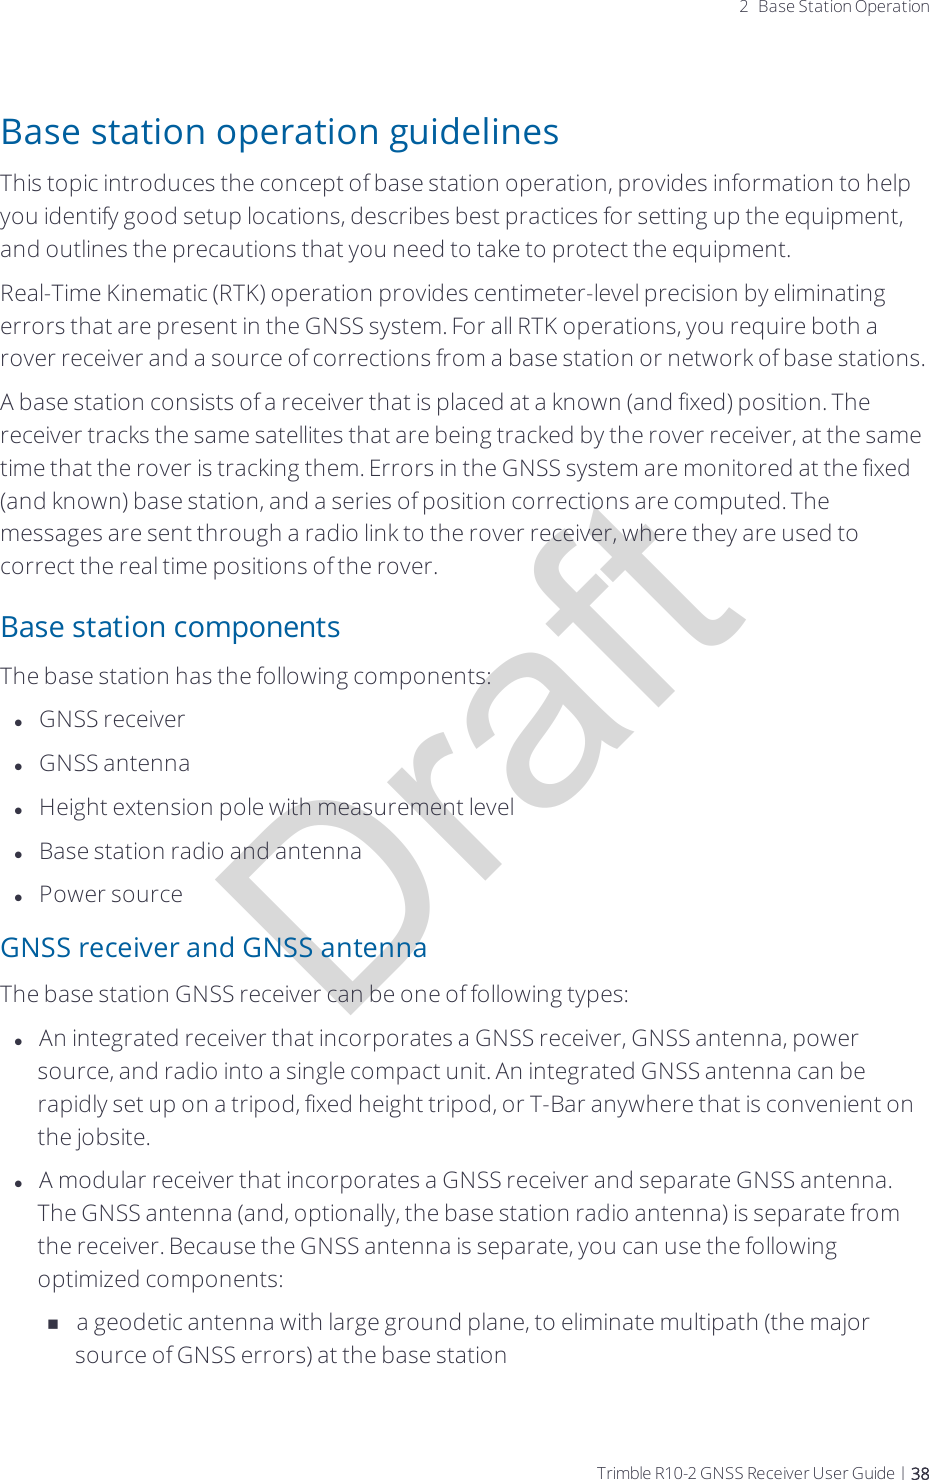 Draft2 Base Station OperationBase station operation guidelinesThis topic introduces the concept of base station operation, provides information to help you identify good setup locations, describes best practices for setting up the equipment, and outlines the precautions that you need to take to protect the equipment.Real-Time Kinematic (RTK) operation provides centimeter-level precision by eliminating errors that are present in the GNSS system. For all RTK operations, you require both a rover receiver and a source of corrections from a base station or network of base stations.A base station consists of a receiver that is placed at a known (and fixed) position. The receiver tracks the same satellites that are being tracked by the rover receiver, at the same time that the rover is tracking them. Errors in the GNSS system are monitored at the fixed (and known) base station, and a series of position corrections are computed. The messages are sent through a radio link to the rover receiver, where they are used to correct the real time positions of the rover.Base station componentsThe base station has the following components:lGNSS receiverlGNSS antennalHeight extension pole with measurement levellBase station radio and antennalPower sourceGNSS receiver and GNSS antennaThe base station GNSS receiver can be one of following types:lAn integrated receiver that incorporates a GNSS receiver, GNSS antenna, power source, and radio into a single compact unit. An integrated GNSS antenna can be rapidly set up on a tripod, fixed height tripod, or T-Bar anywhere that is convenient on the jobsite.lA modular receiver that incorporates a GNSS receiver and separate GNSS antenna. The GNSS antenna (and, optionally, the base station radio antenna) is separate from the receiver. Because the GNSS antenna is separate, you can use the following optimized components:na geodetic antenna with large ground plane, to eliminate multipath (the major source of GNSS errors) at the base stationTrimble R10-2 GNSS Receiver User Guide | 38